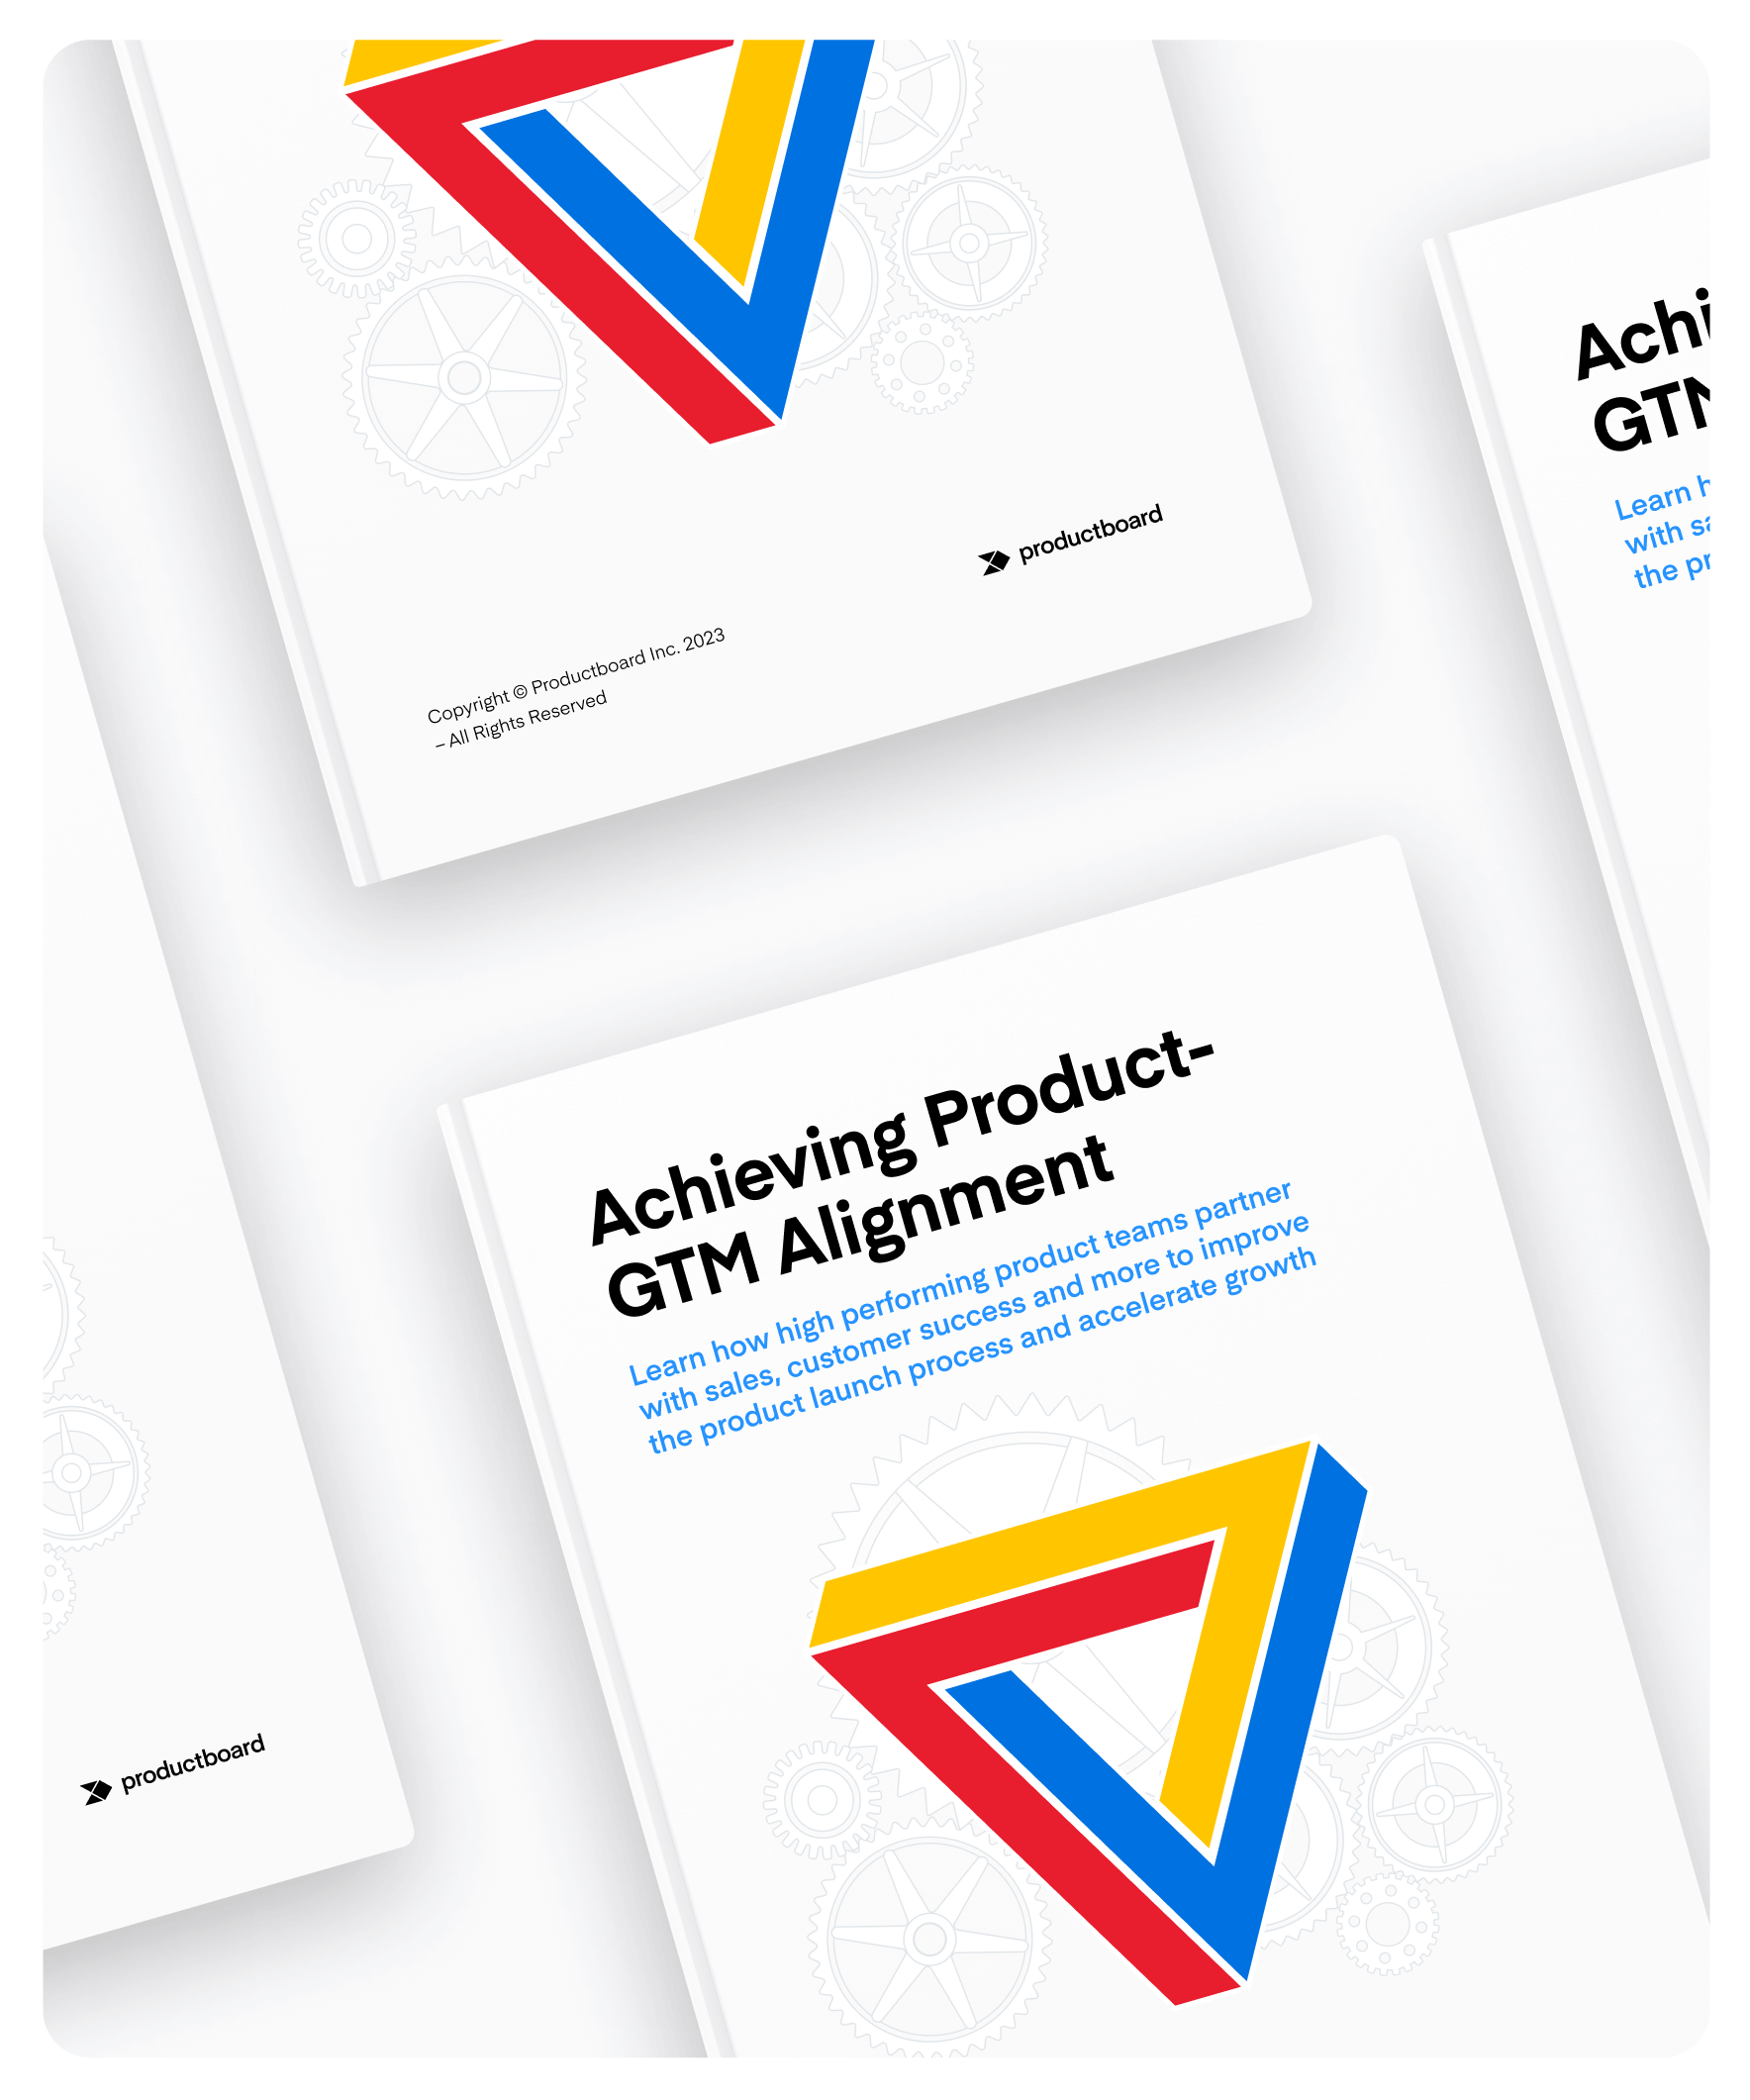 Achieving Product-GTM Alignment